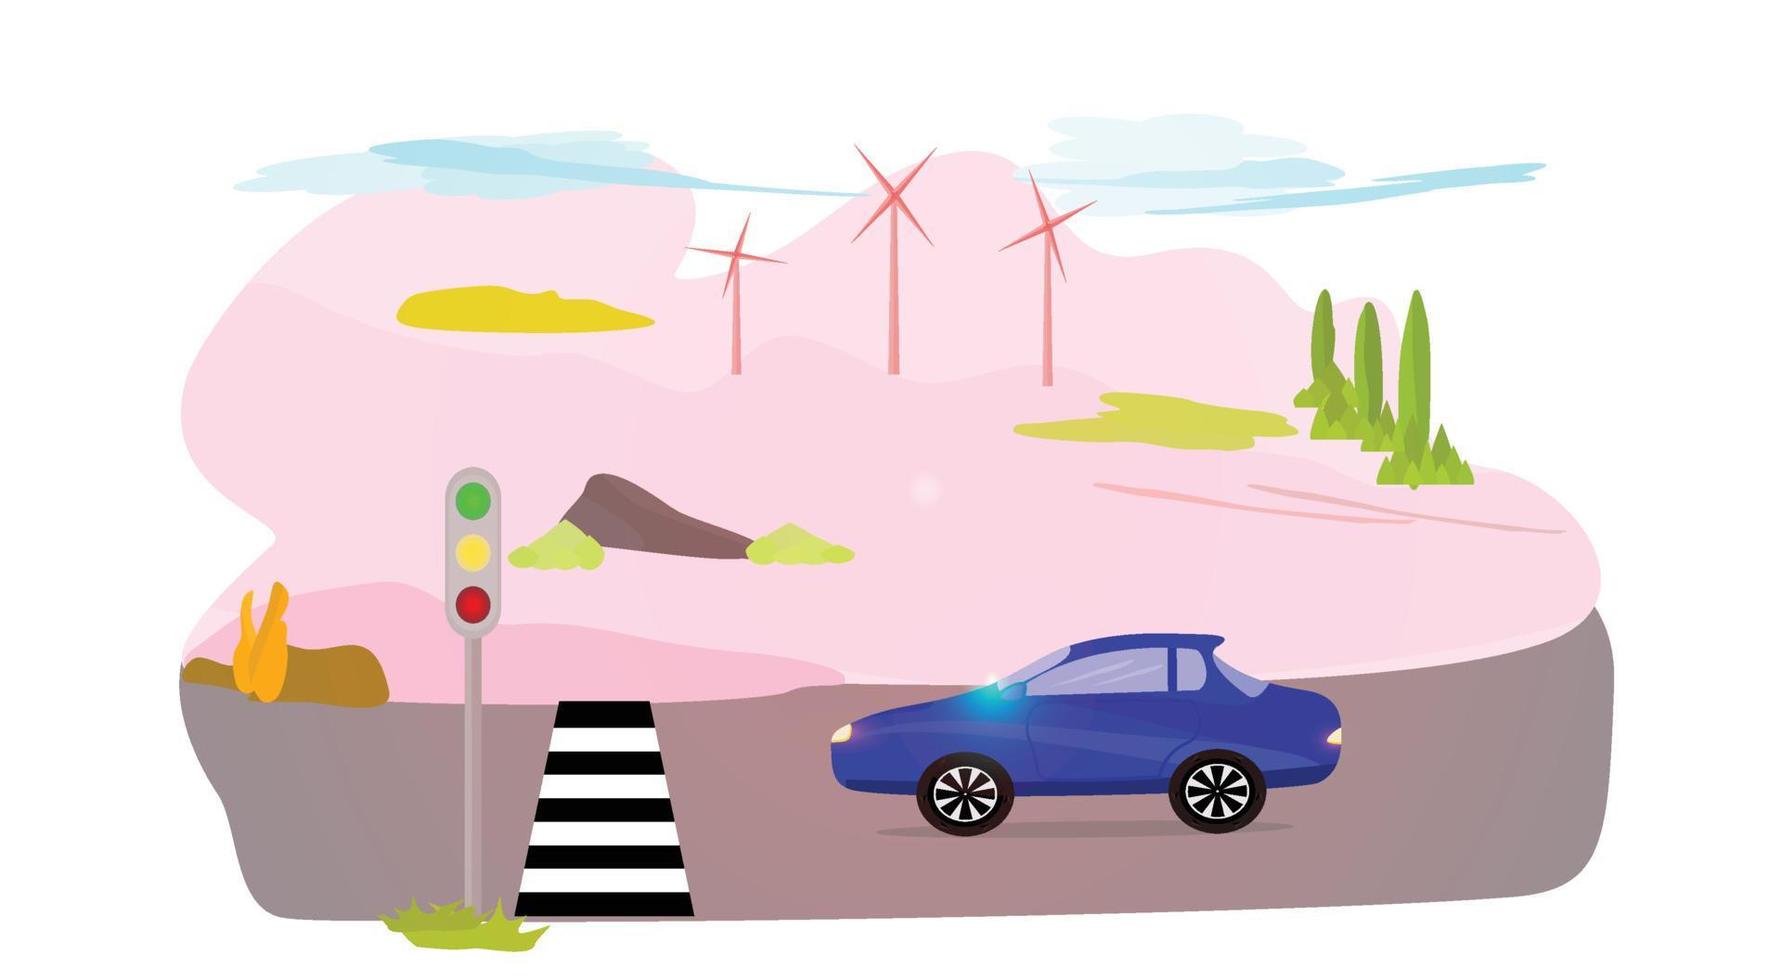 Car road landscape countryside meadow abstract backgrounds vector illustration EPS10 07052021